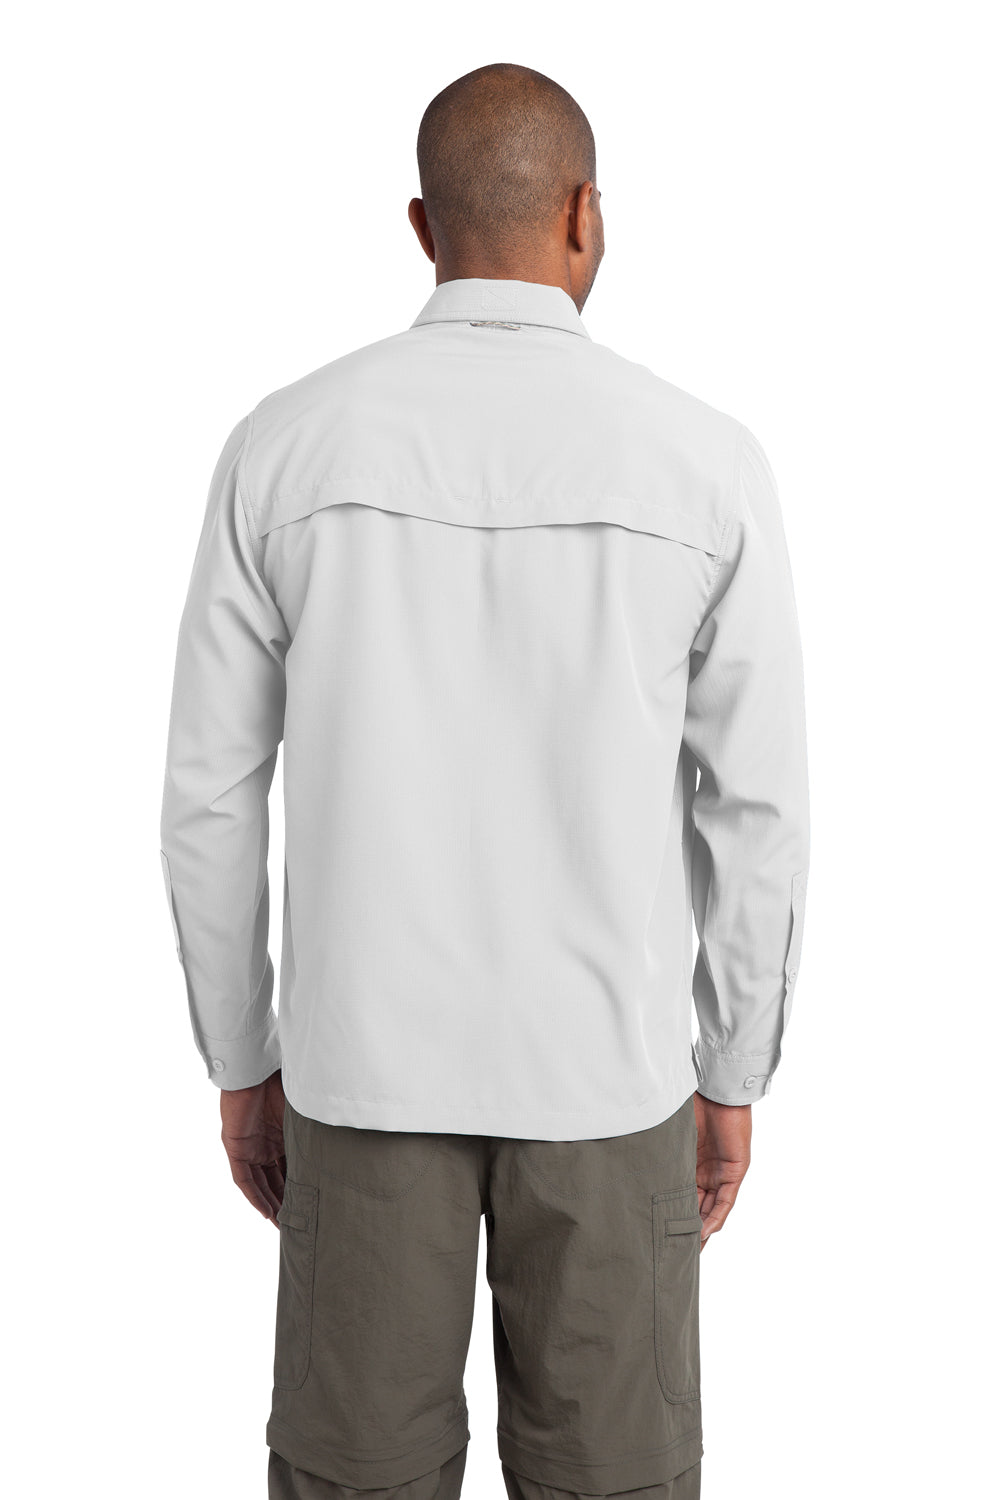 Eddie Bauer EB600 Mens Performance Fishing Moisture Wicking Long Sleeve Button Down Shirt w/ Double Pockets White Back